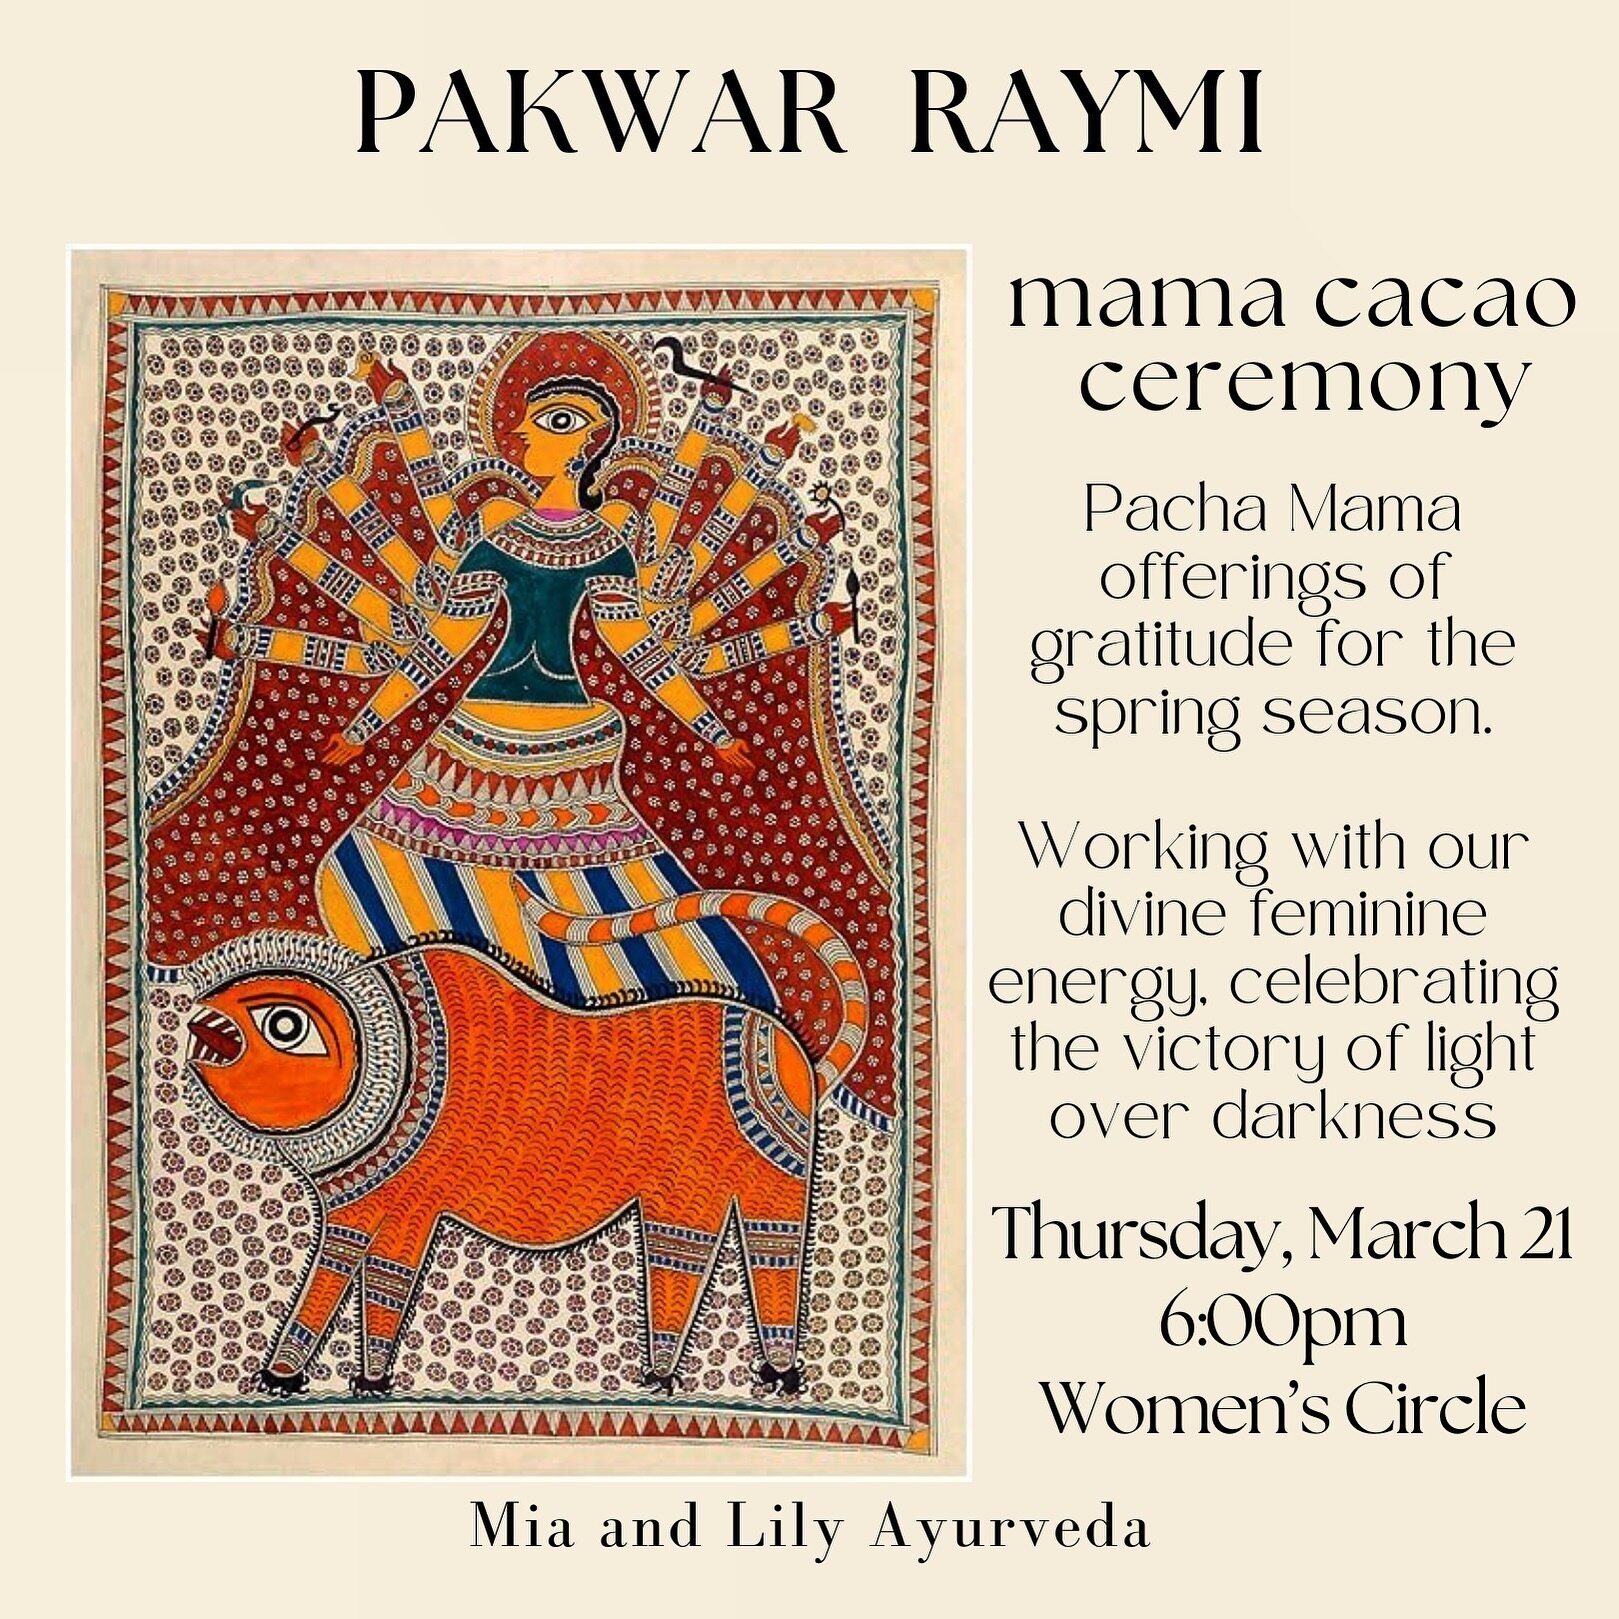 As one of the four main agriculture-related festivals celebrated by the indigenous people of the Ecuadorian Andes,☀️Pawkar Raymi☀️ is a joyous celebration of gratitude for the gifts from the Pacha Mama / which falls on the spring equinox.

With the w